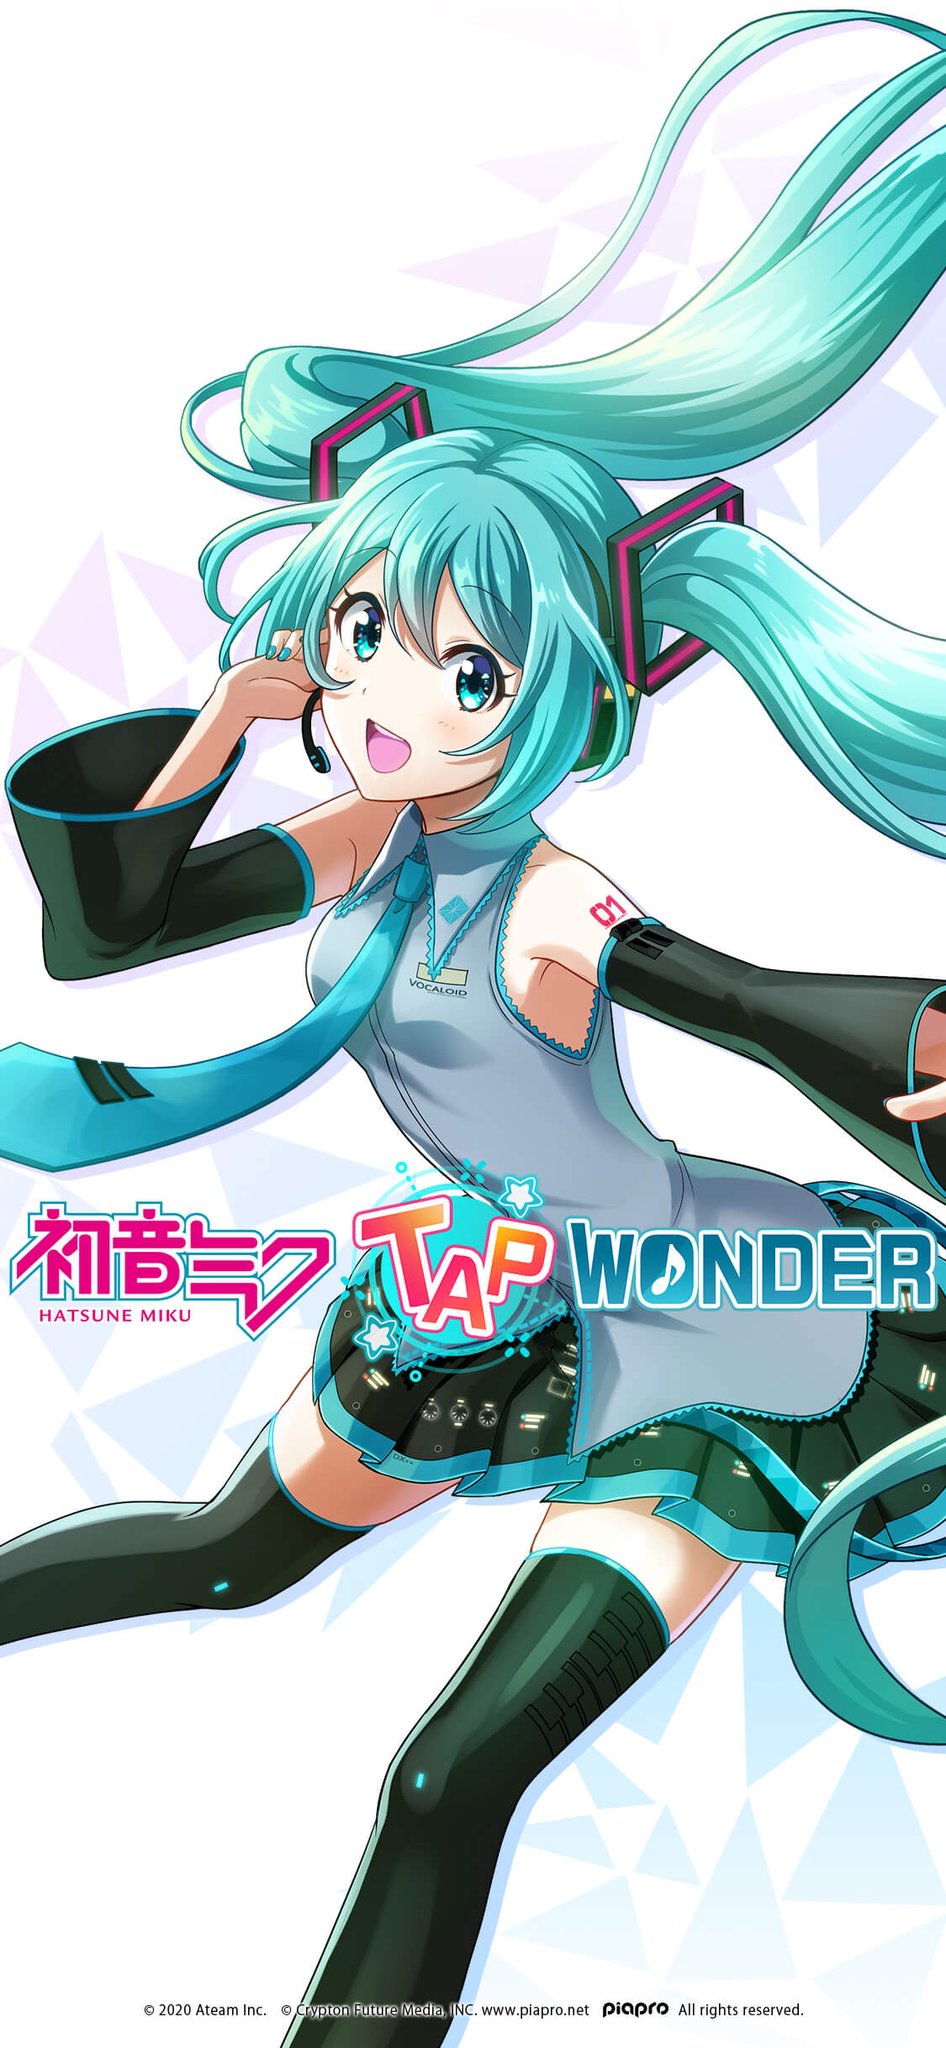 Hatsune Miku Tap Wonder Official The Second Is This Free Wallpaper Featuring An Illustration Of Hatsune Miku That Will Appear In Tap Wonder There Are Two Different Sizes Keep